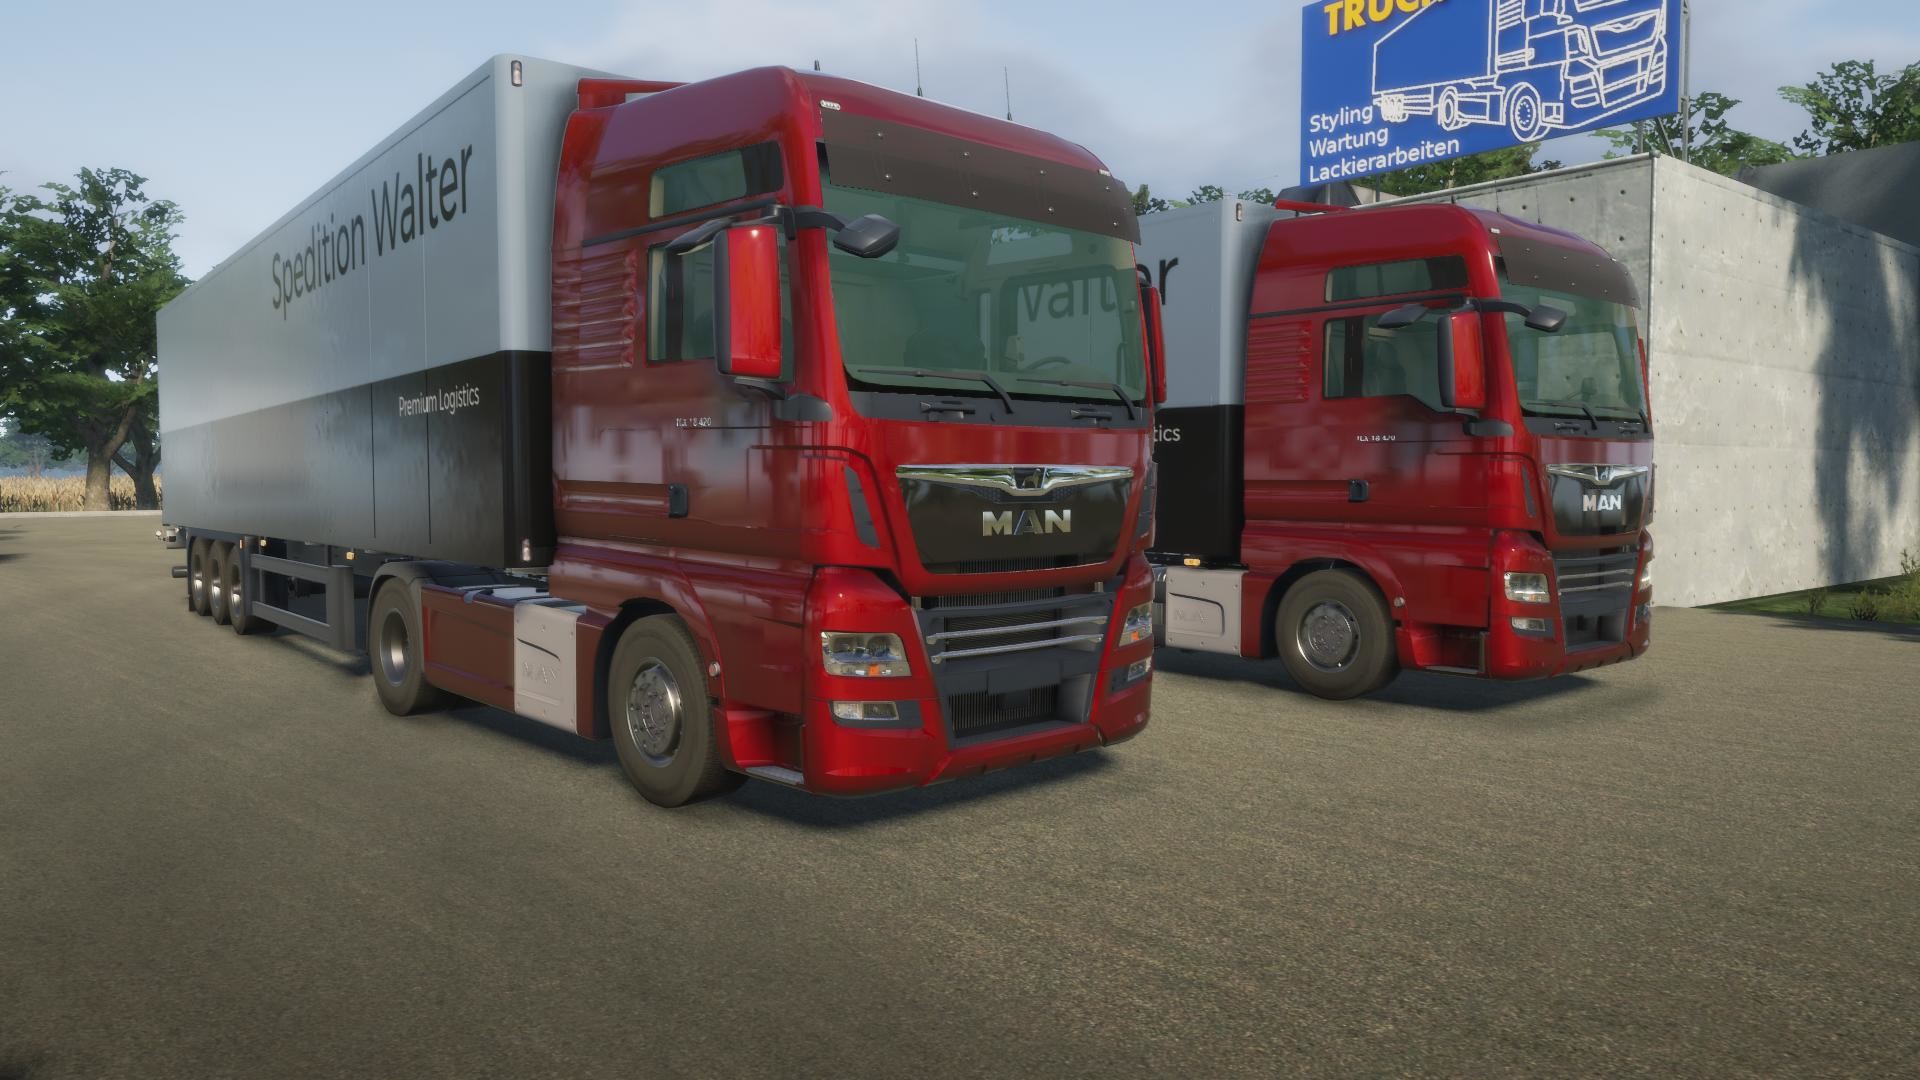 Review: On the Road - Truck Simulator - PS5, PS4